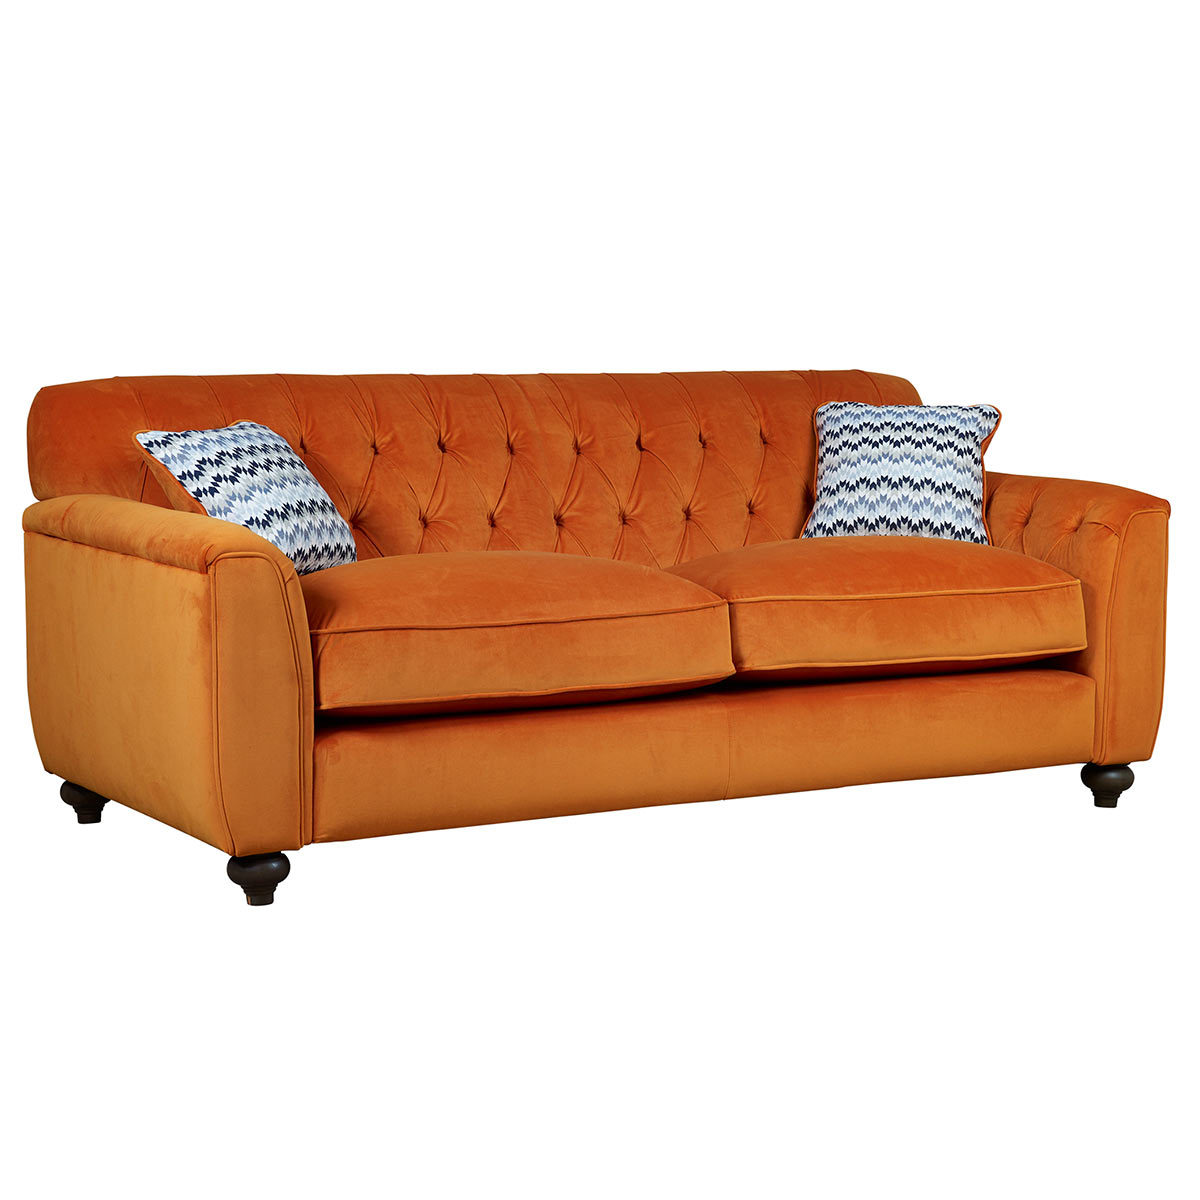 Avante Button Back 4 Seater Velvet Sofa with 2 Accent Pillows, Sunset